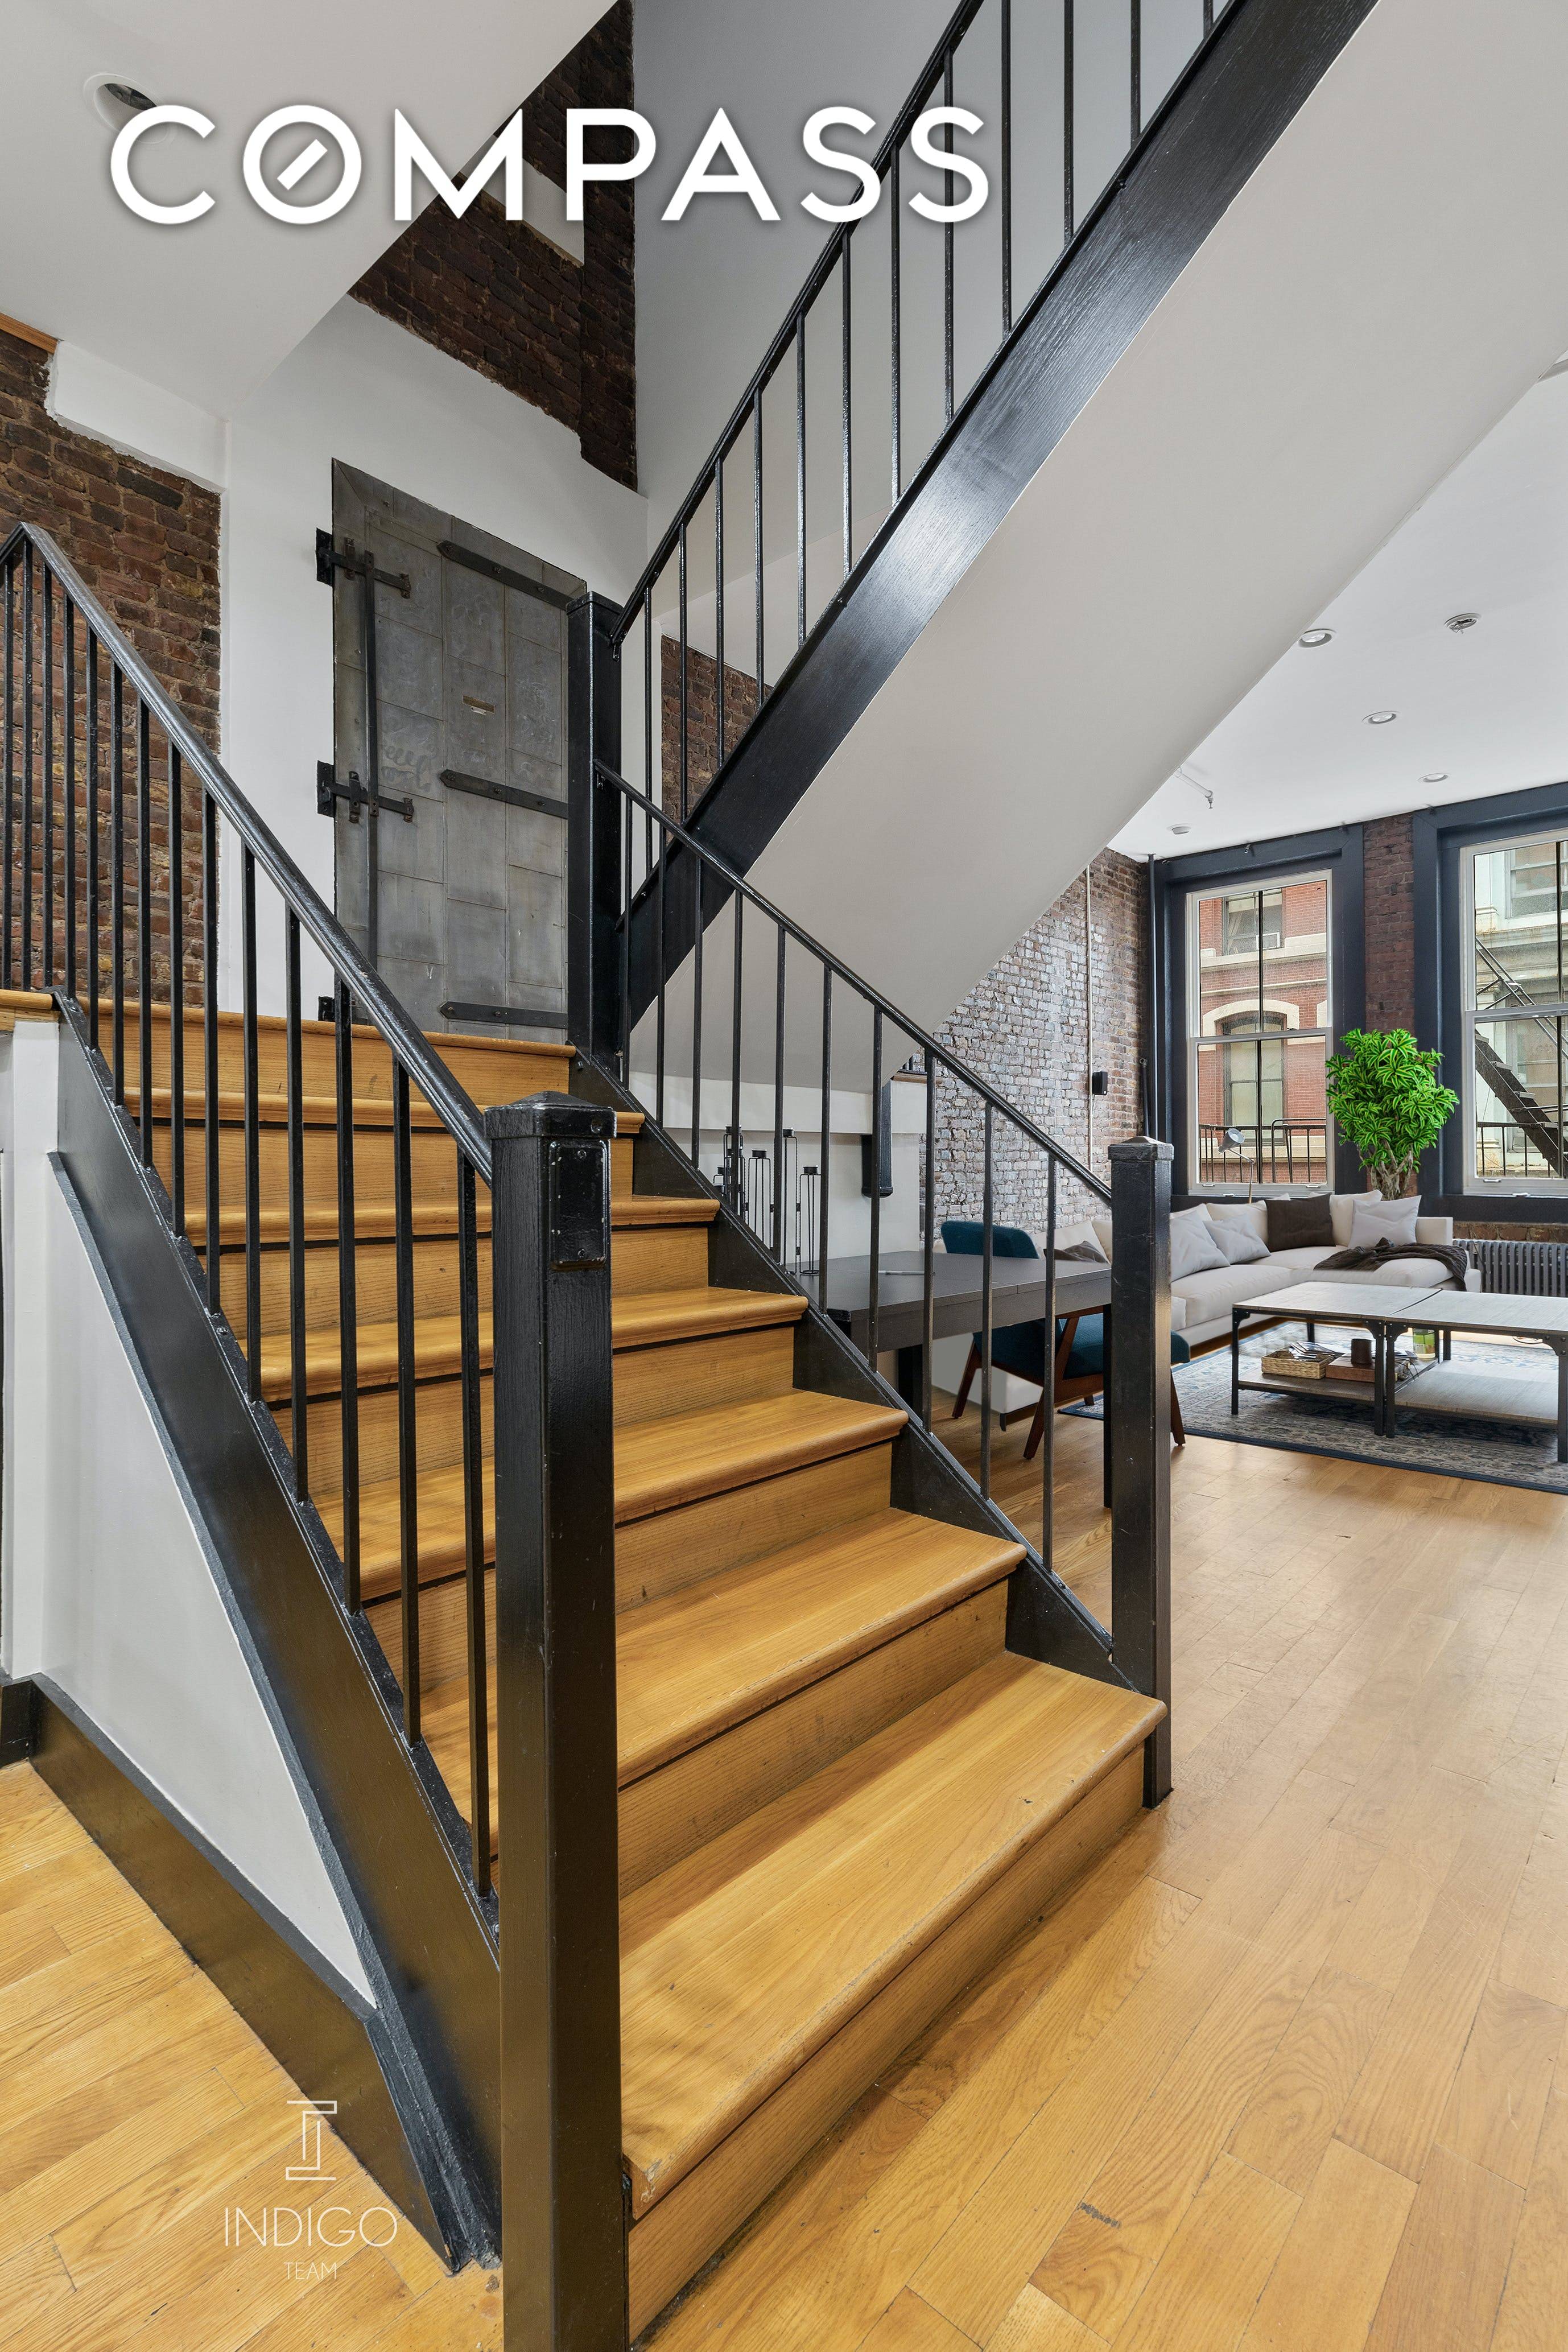 Welcome to Soho. We are thrilled to present a duplex penthouse loft with a private roof deck.